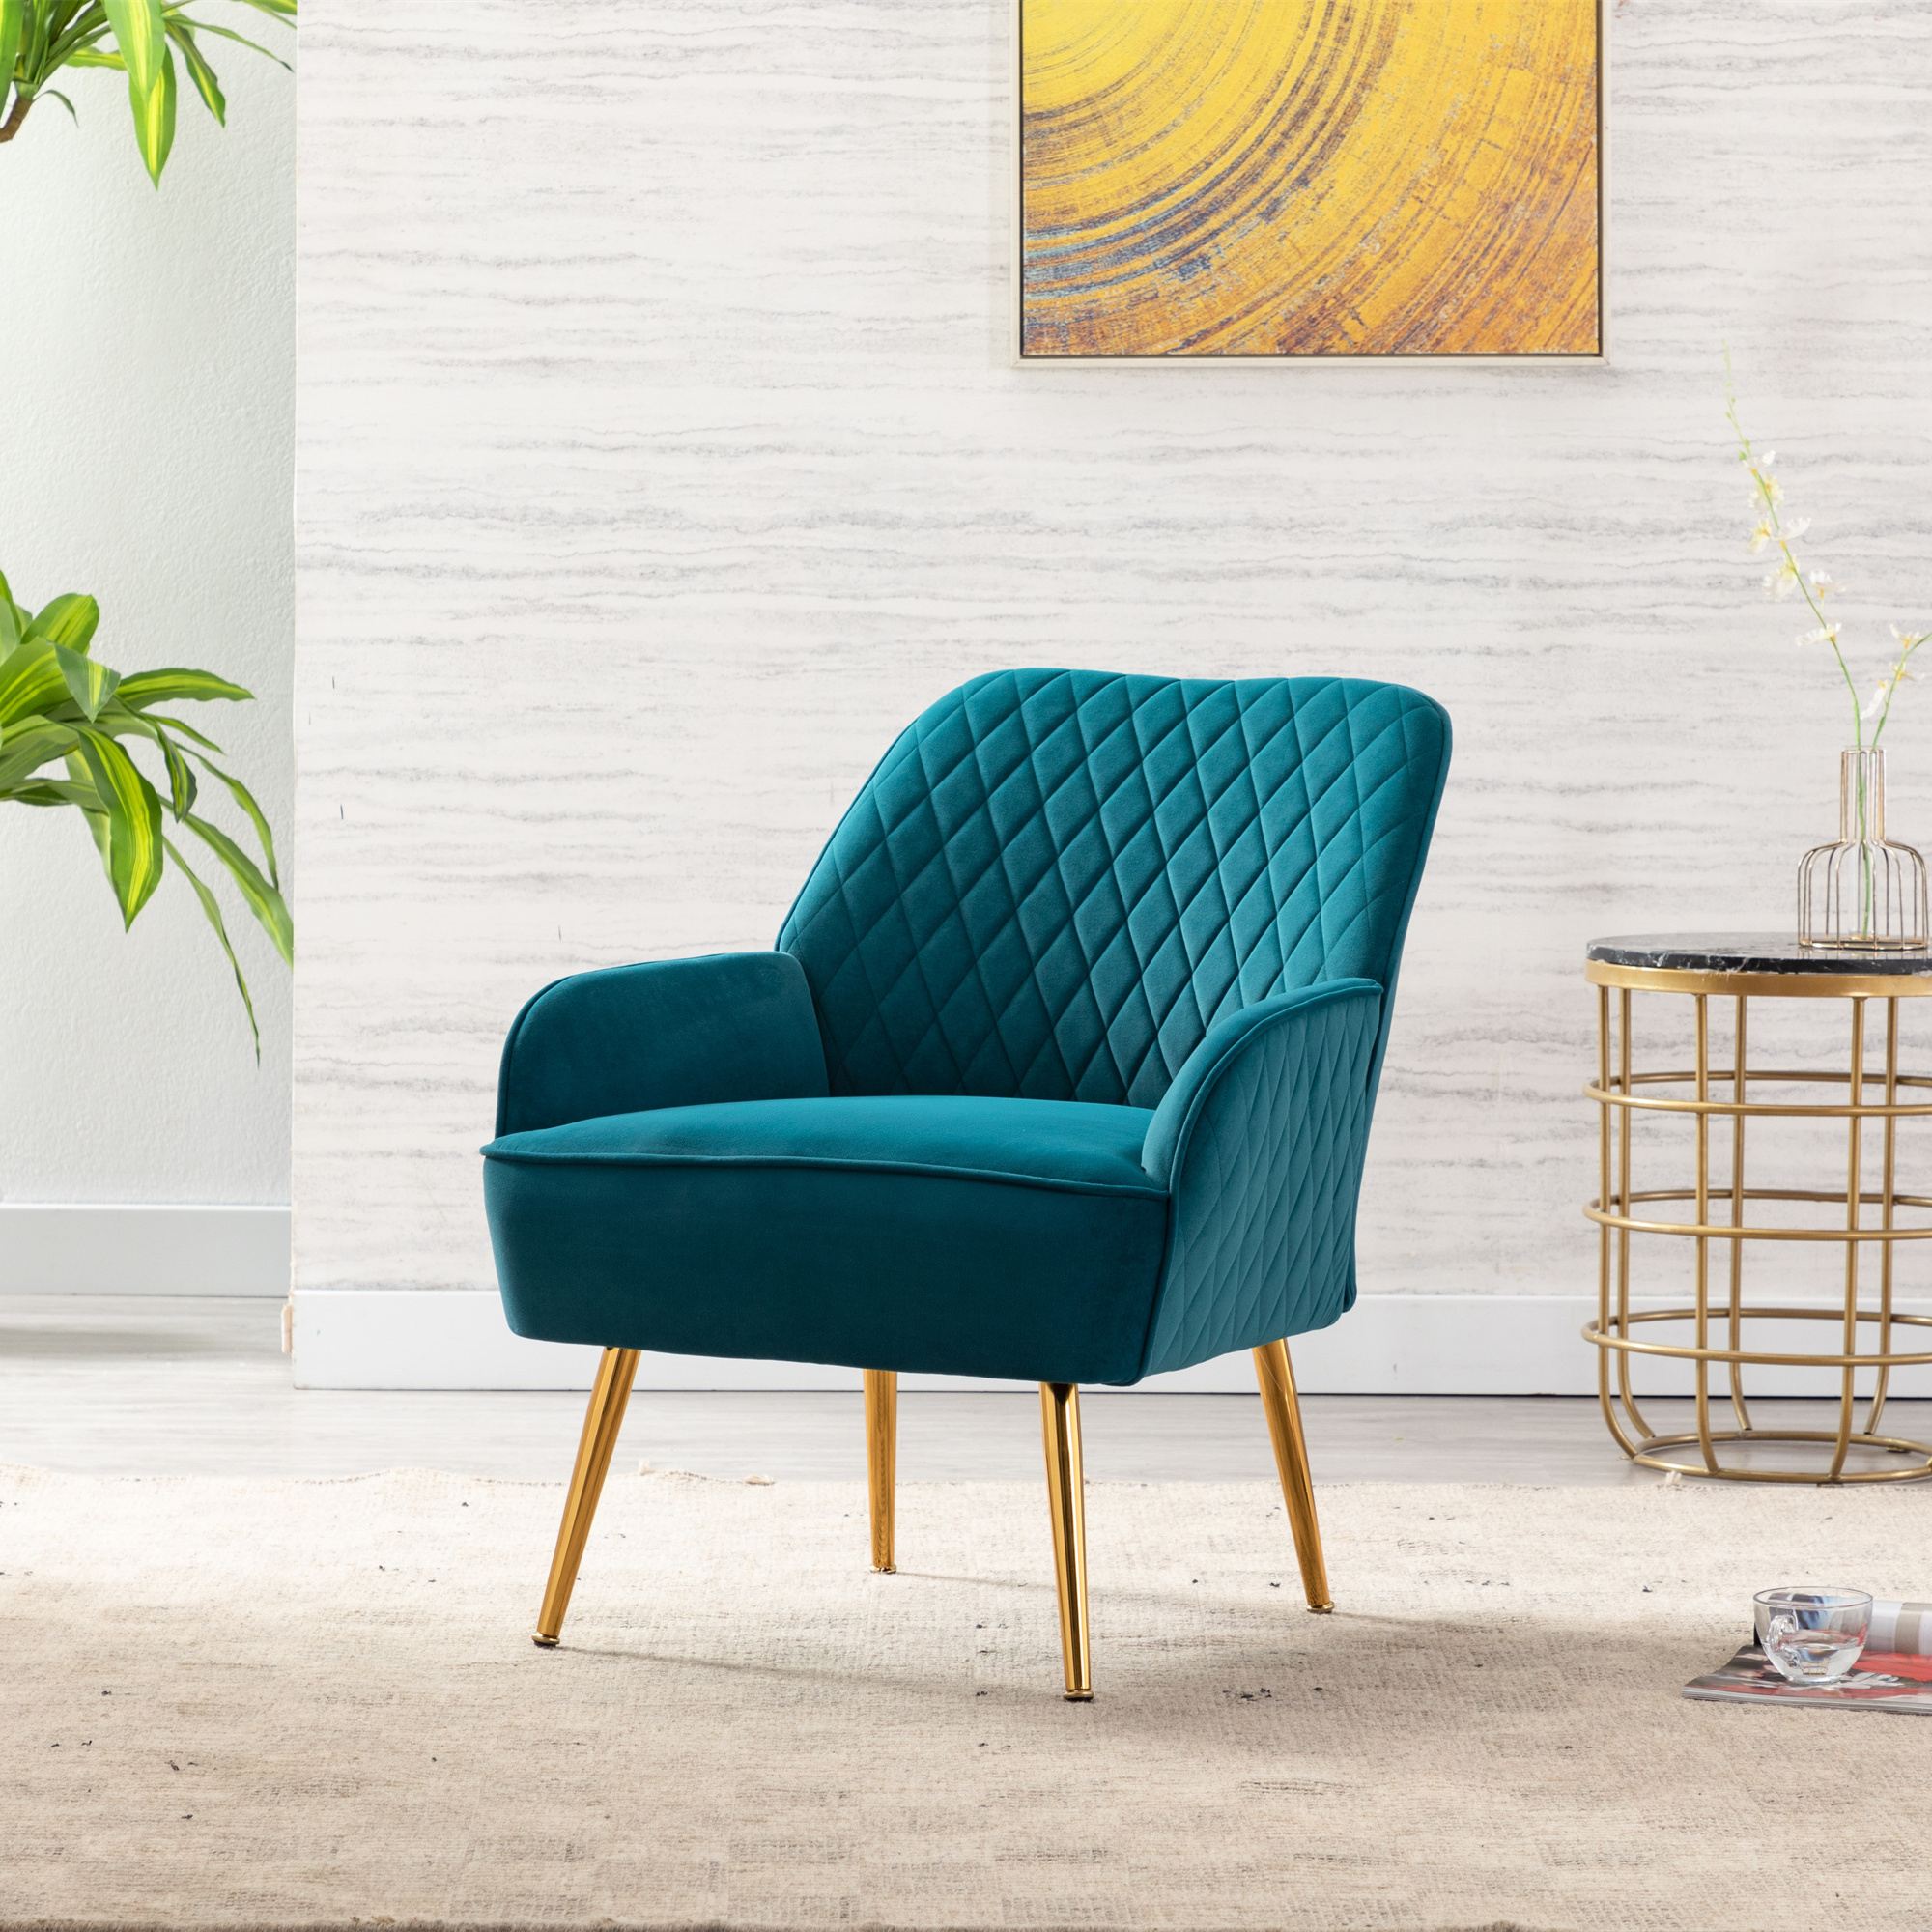 Modern Soft Velvet Material Dark Green Ergonomics Accent Chair Living Room Chair Bedroom Chair Home Chair With Gold Legs And Adjustable Legs For Indoor Home Teal-Boyel Living